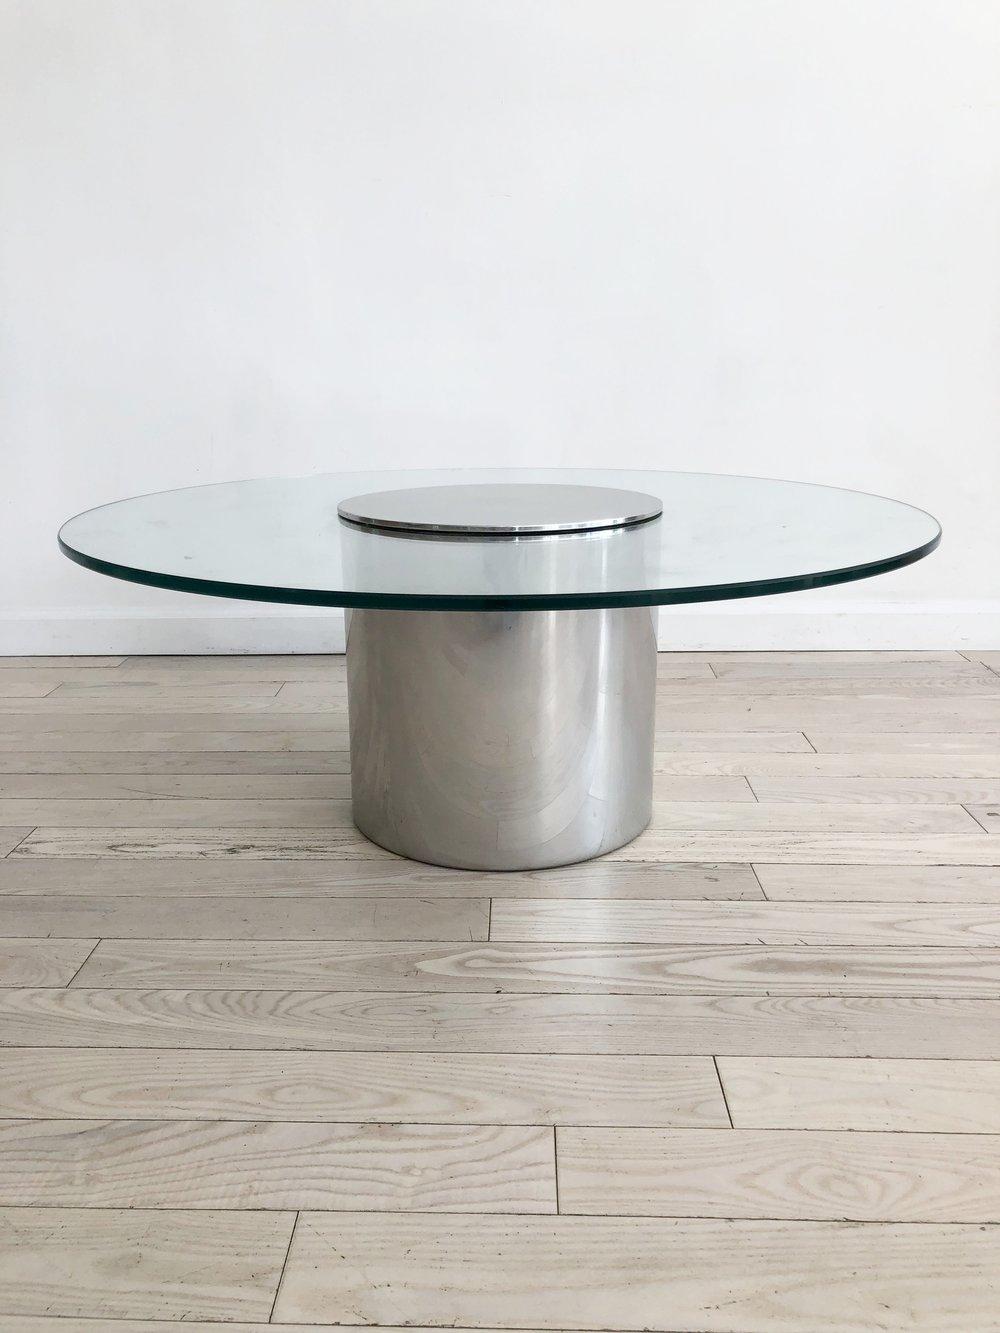 Ultra sleek polished drum table made of aluminium drum base and circle glass top. Designed by Paul Mayen for Architectural Supplements . Very unique design that features a lid atop the glass, to create the illusion that the metal drum pierces the